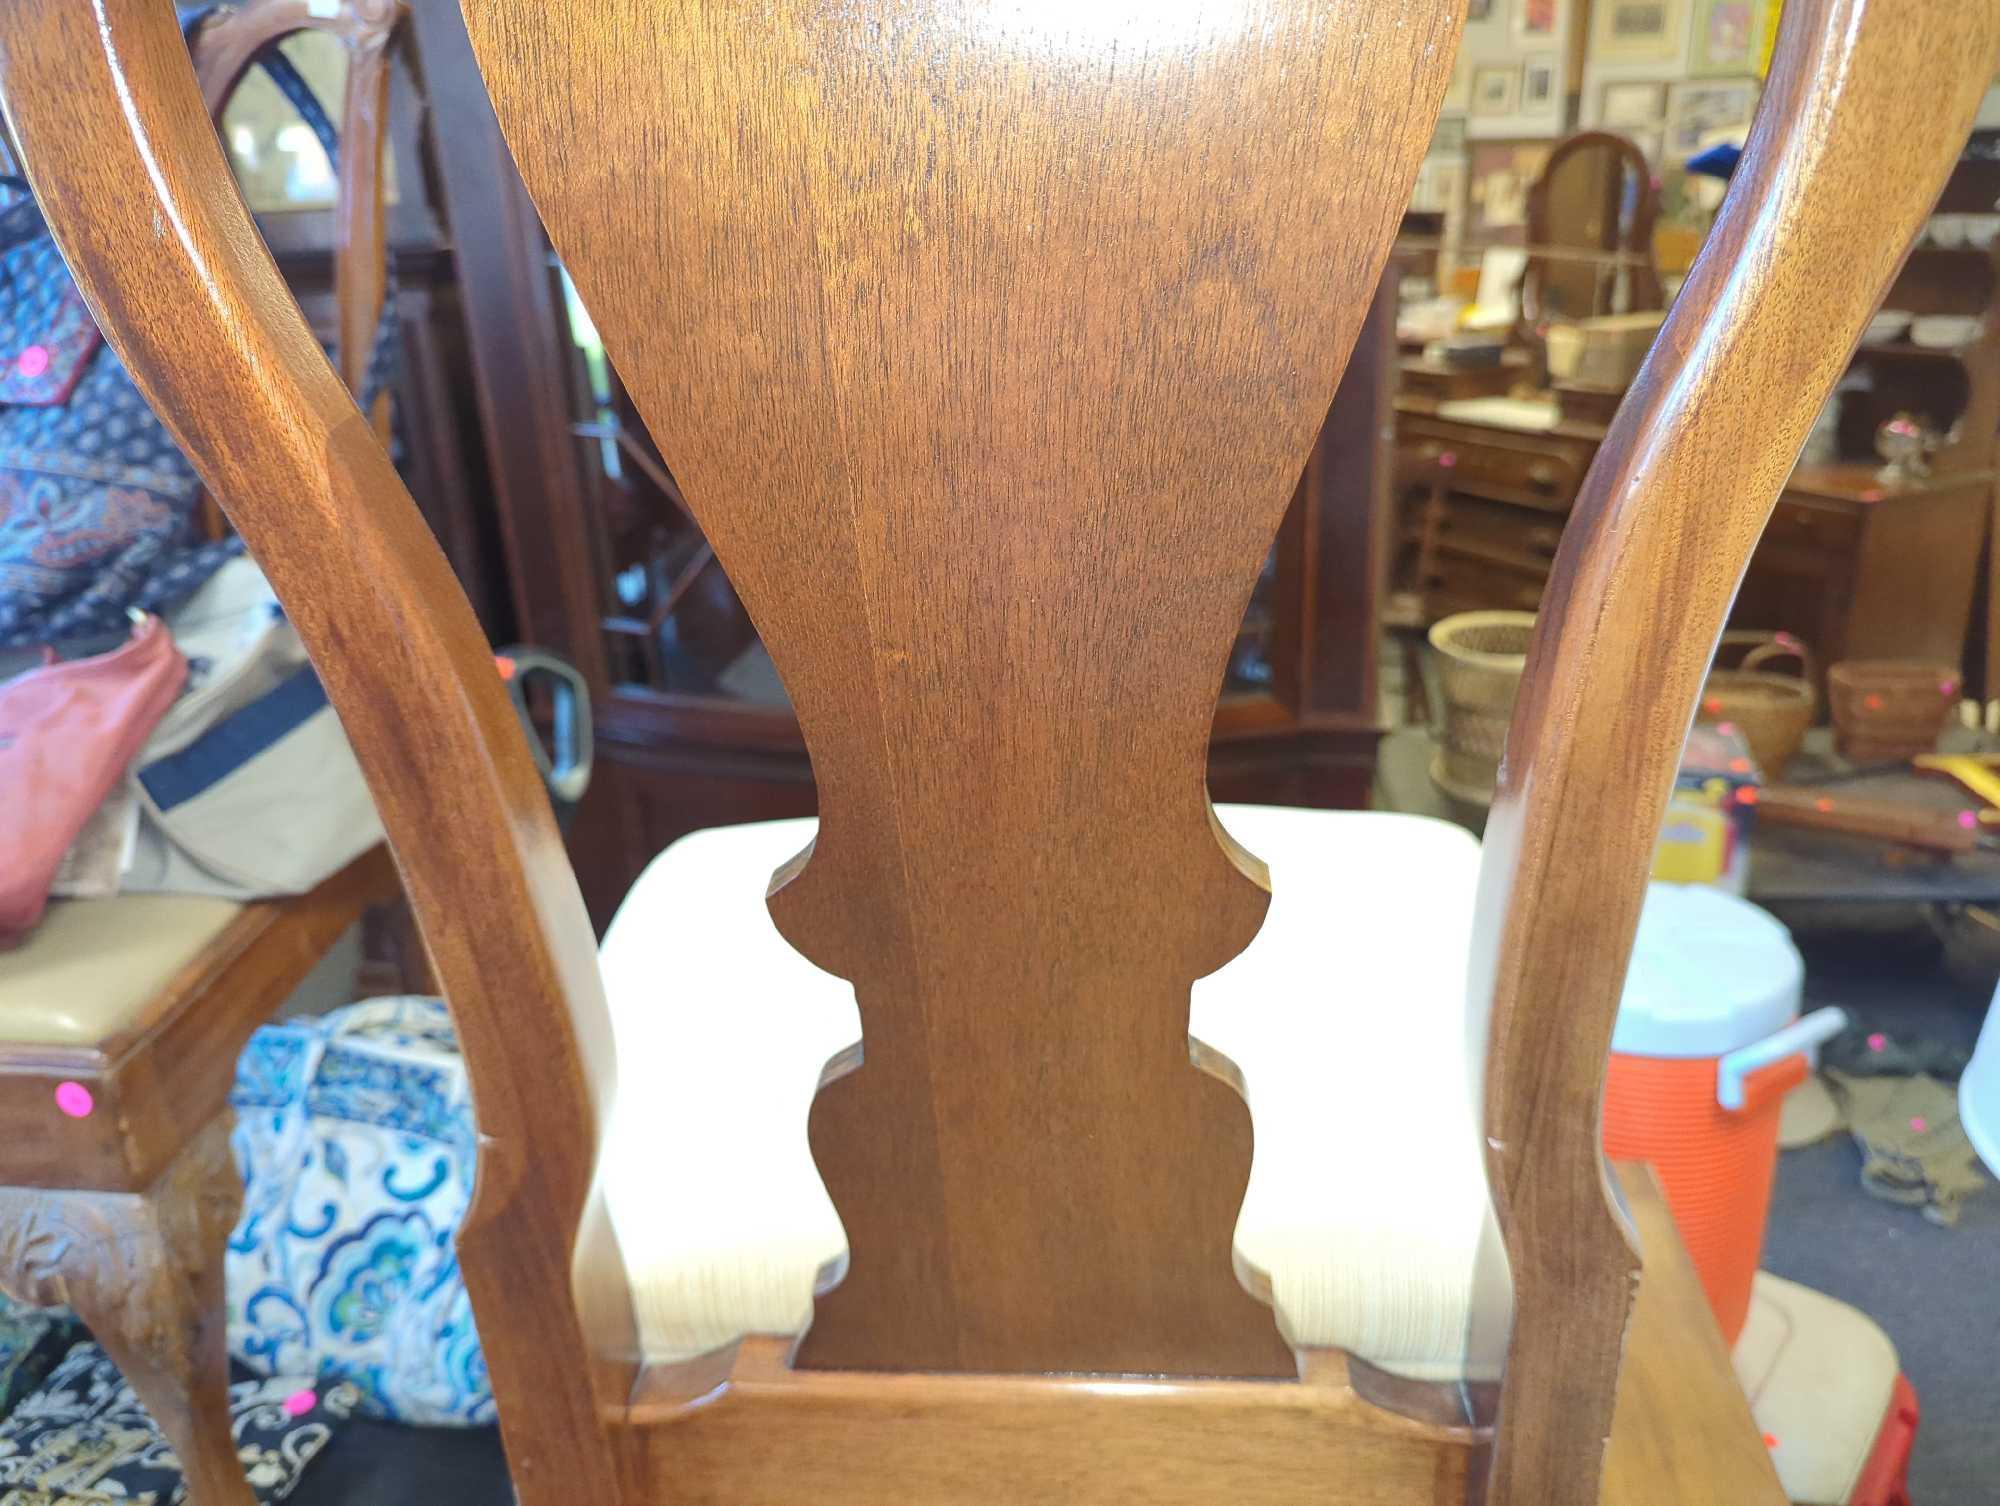 Queen Anne Style Splat Back Dinning Chair, Approximate Dimensions - 41" H x 22" D x 23" W, Appears